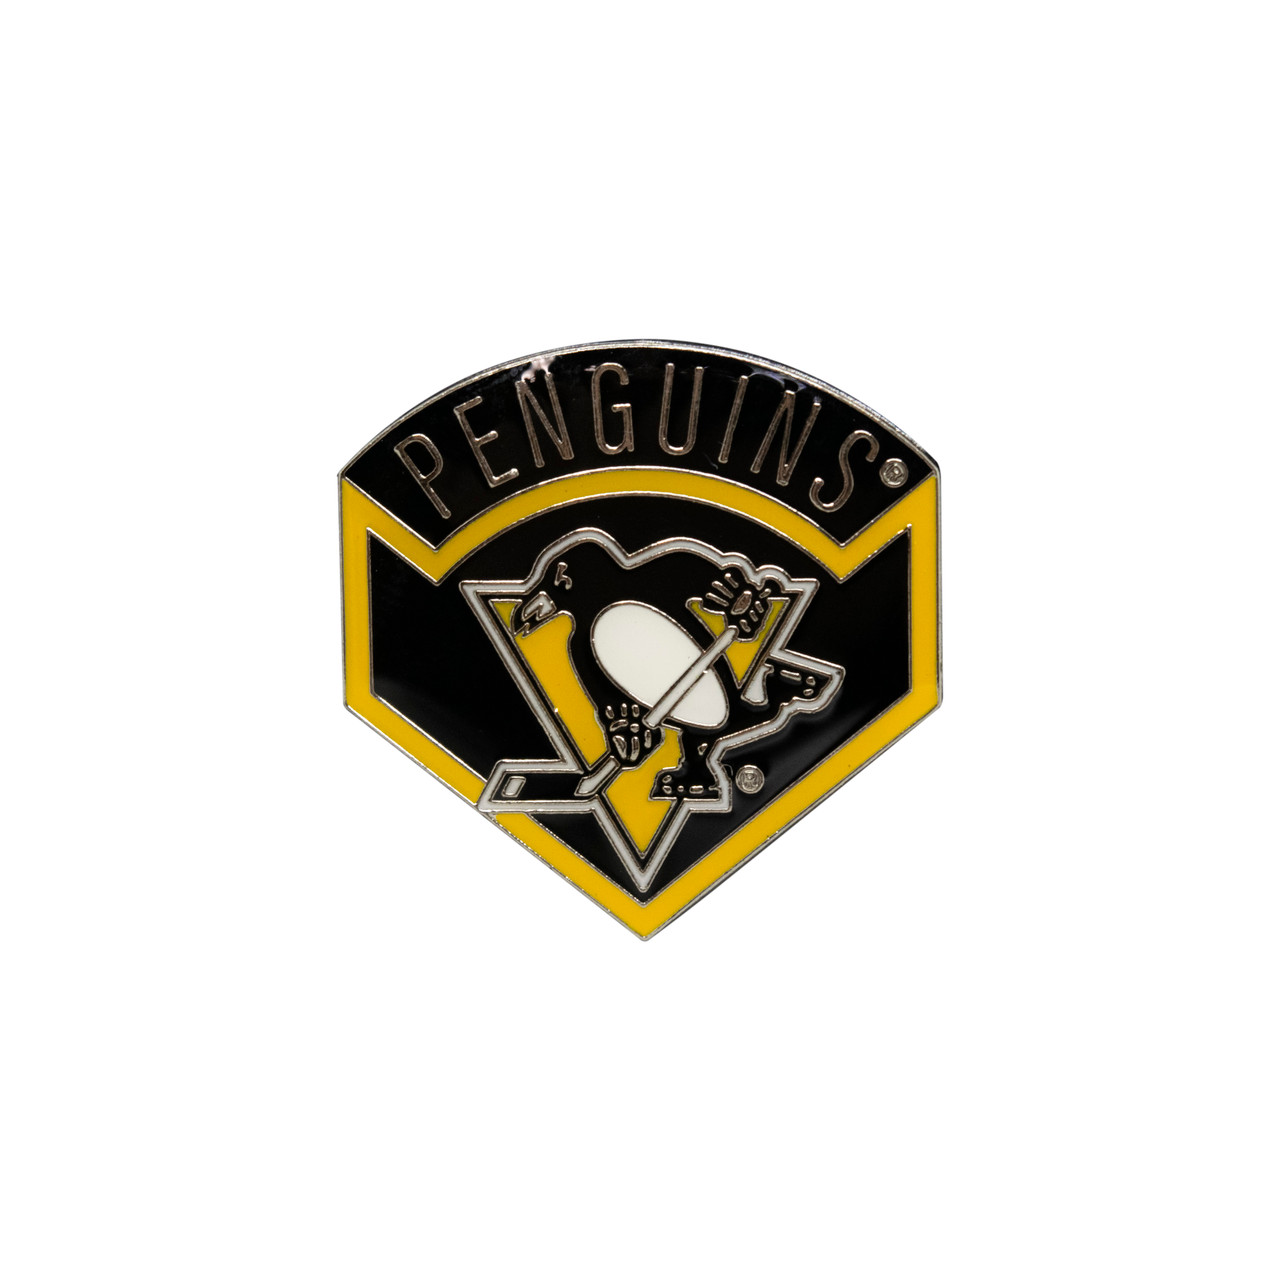 Pin on Penguins Pittsburgh